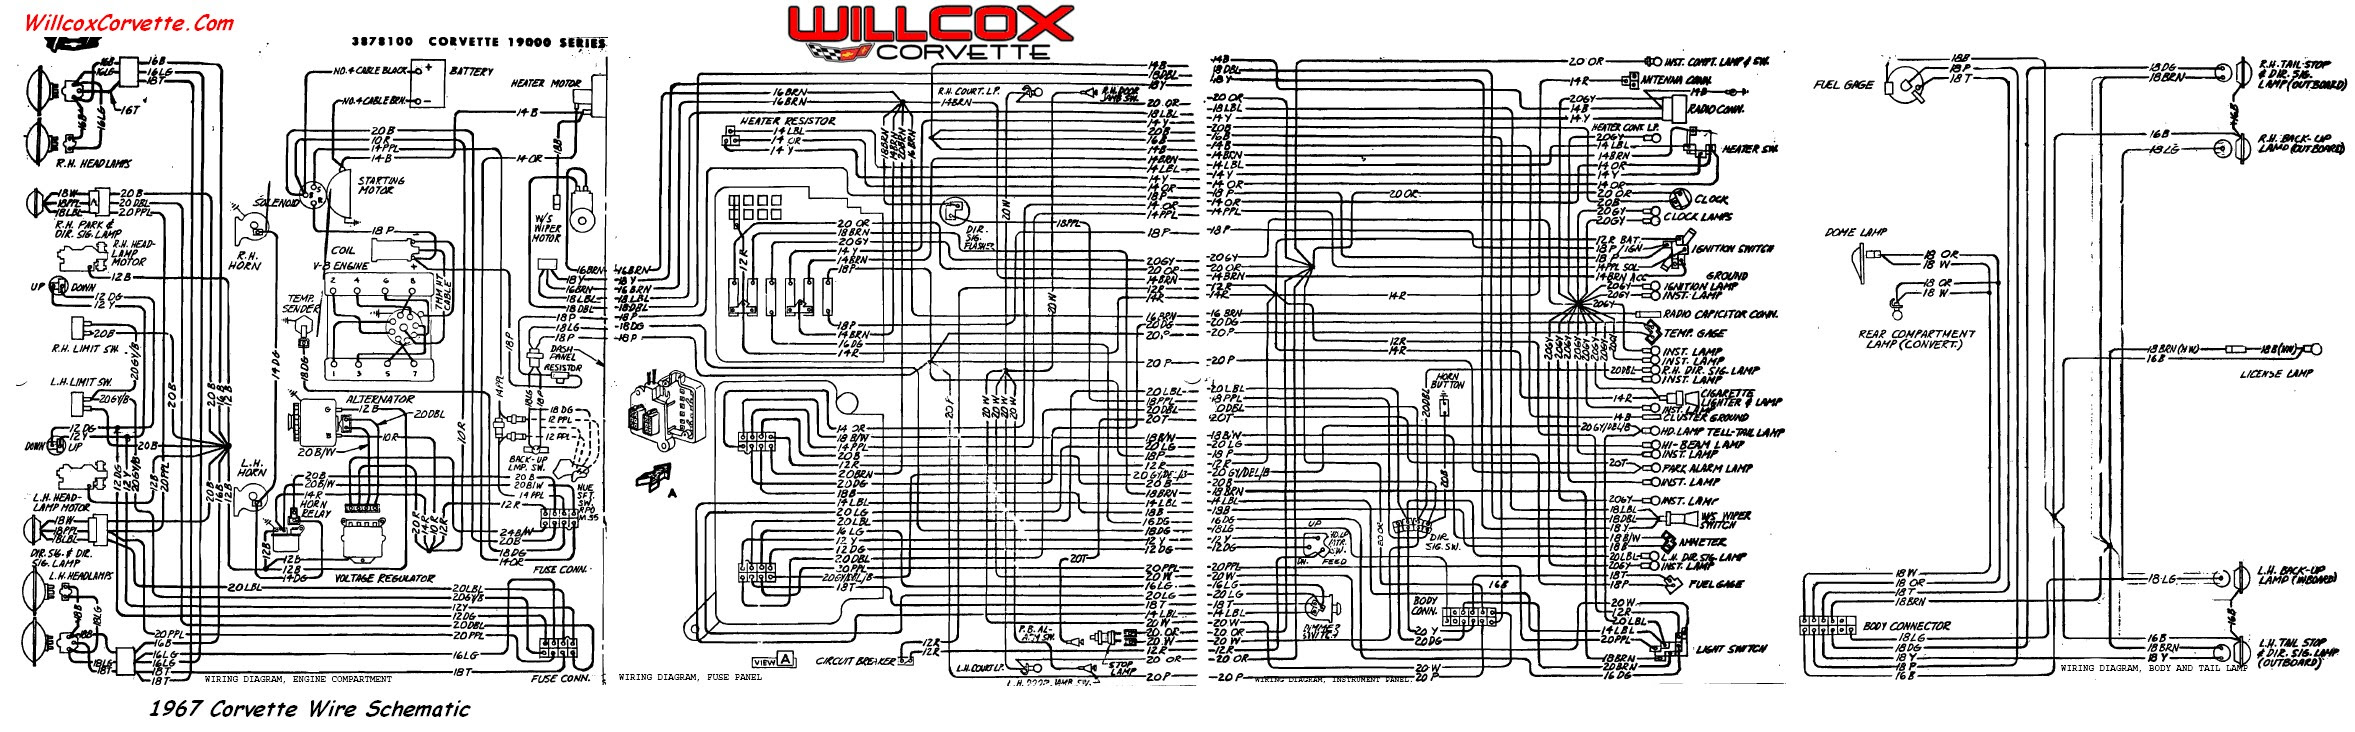 1991 Corvette Wiring Diagram 1968 Corvette Wiring Diagram Tracer